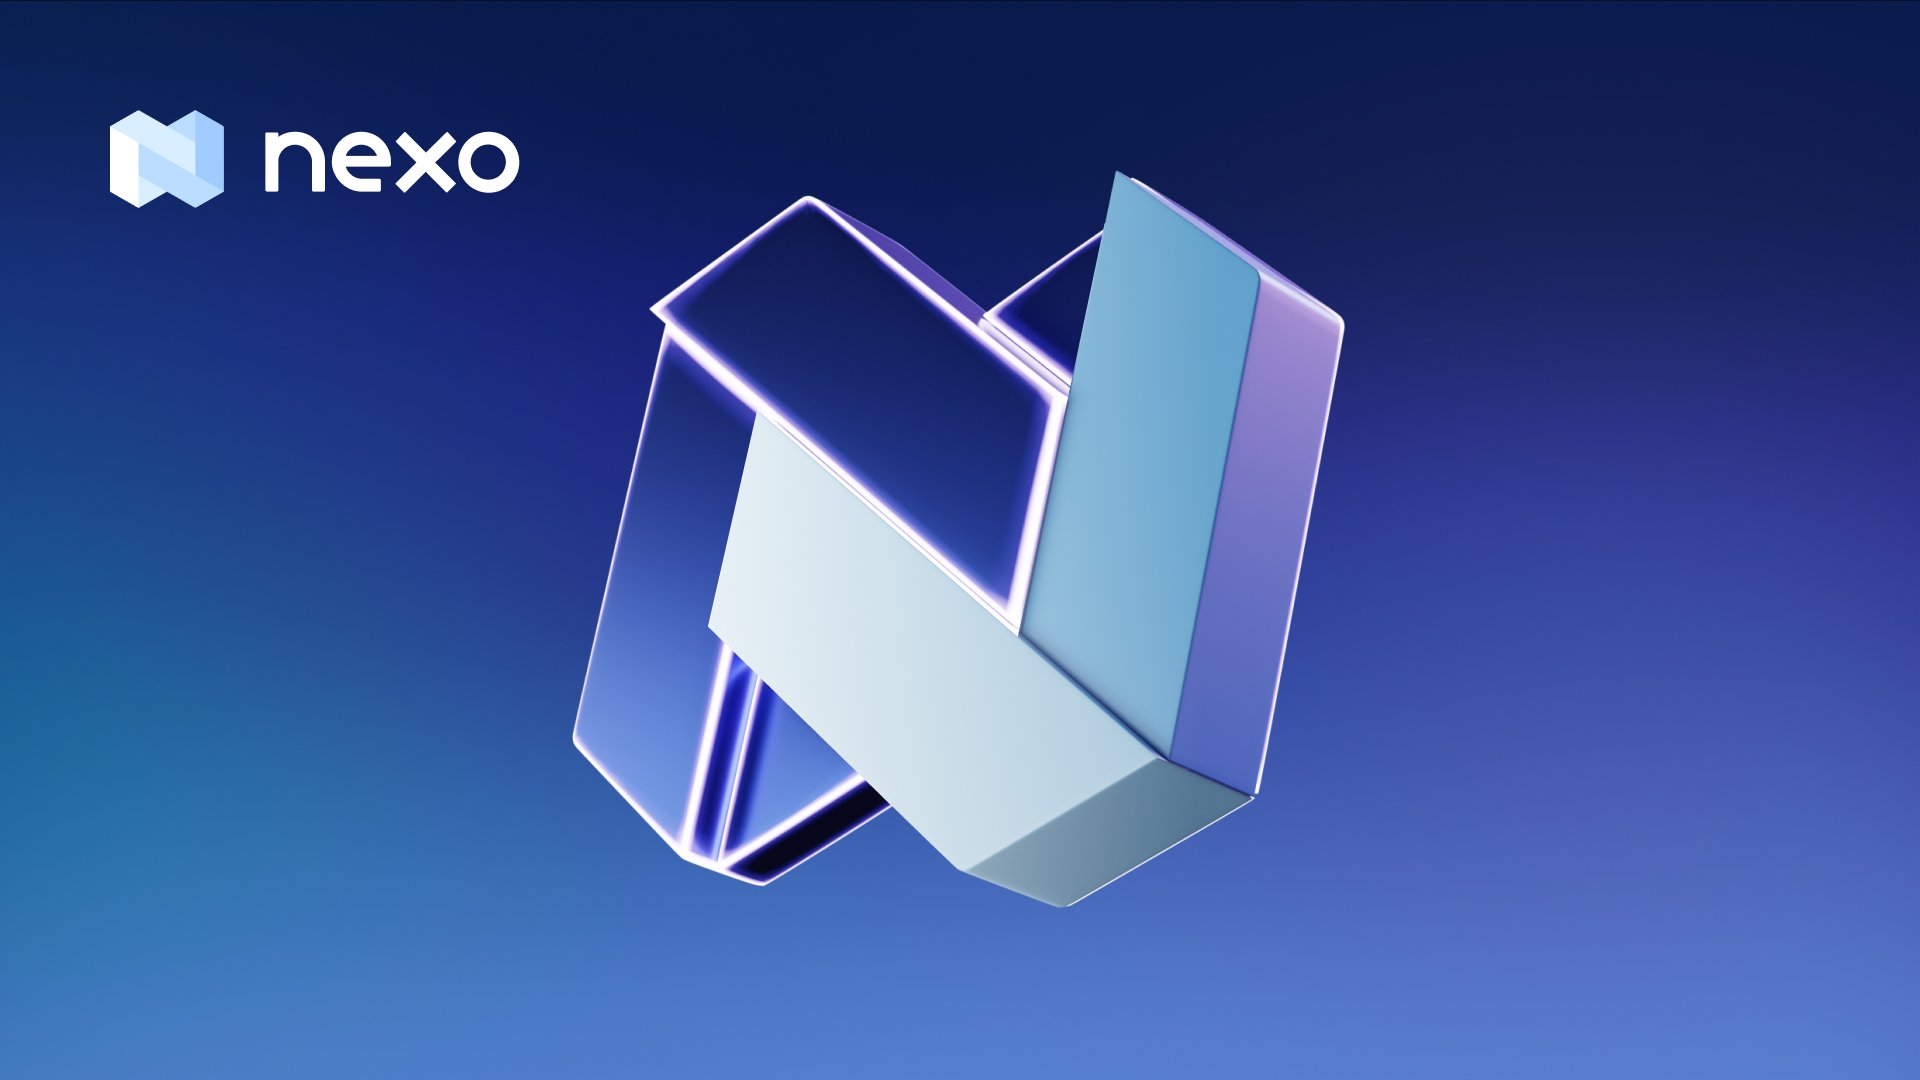 What Is the Difference Between the Nexo Wallet and Nexo?